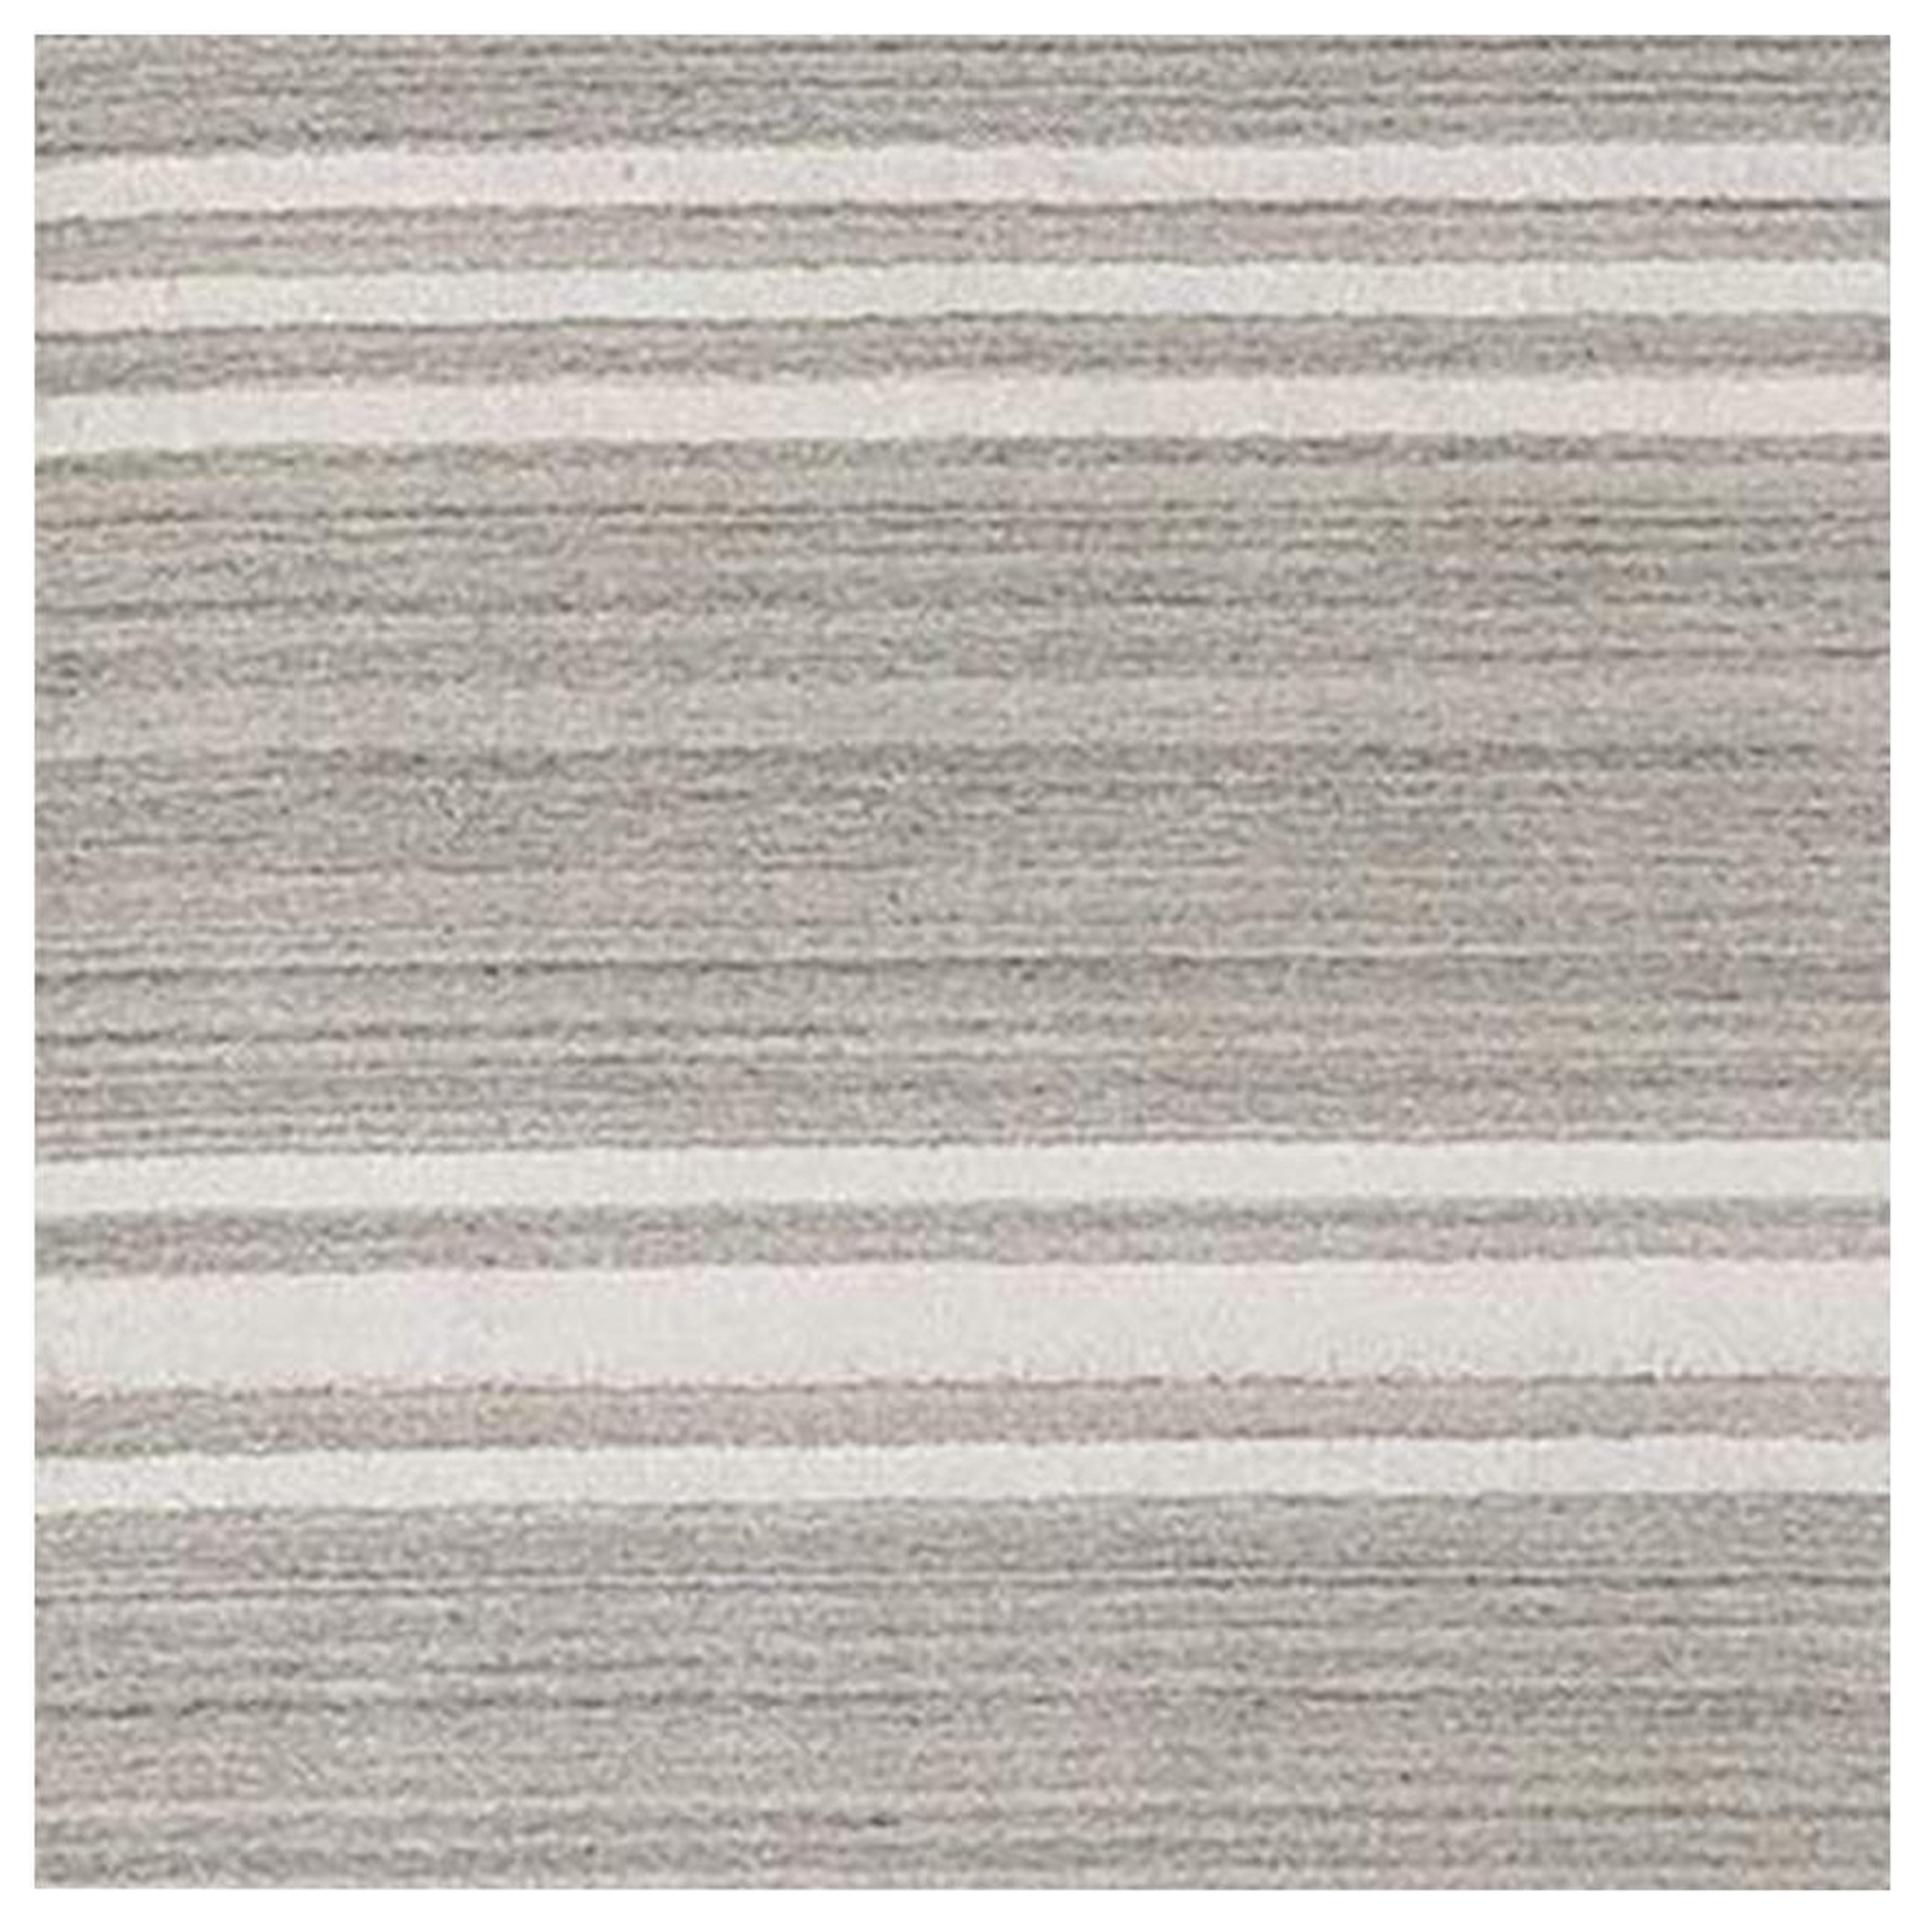 Swatch for Rayado Rug in Sand by Ben Soleimani For Sale